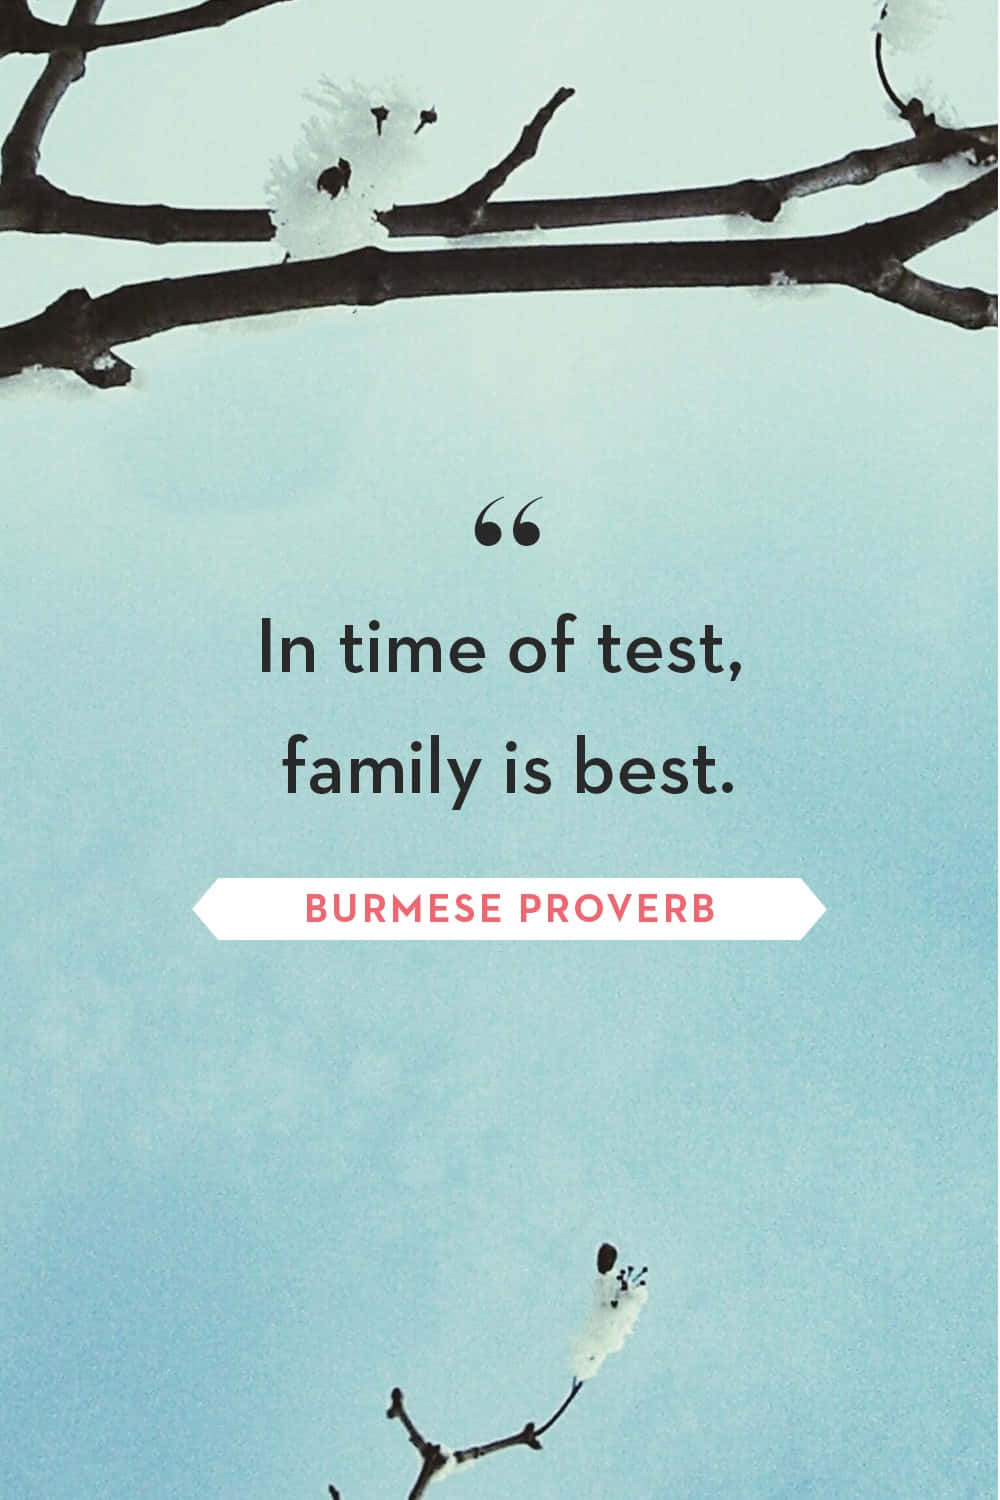 Family Support Burmese Proverb Quote Wallpaper